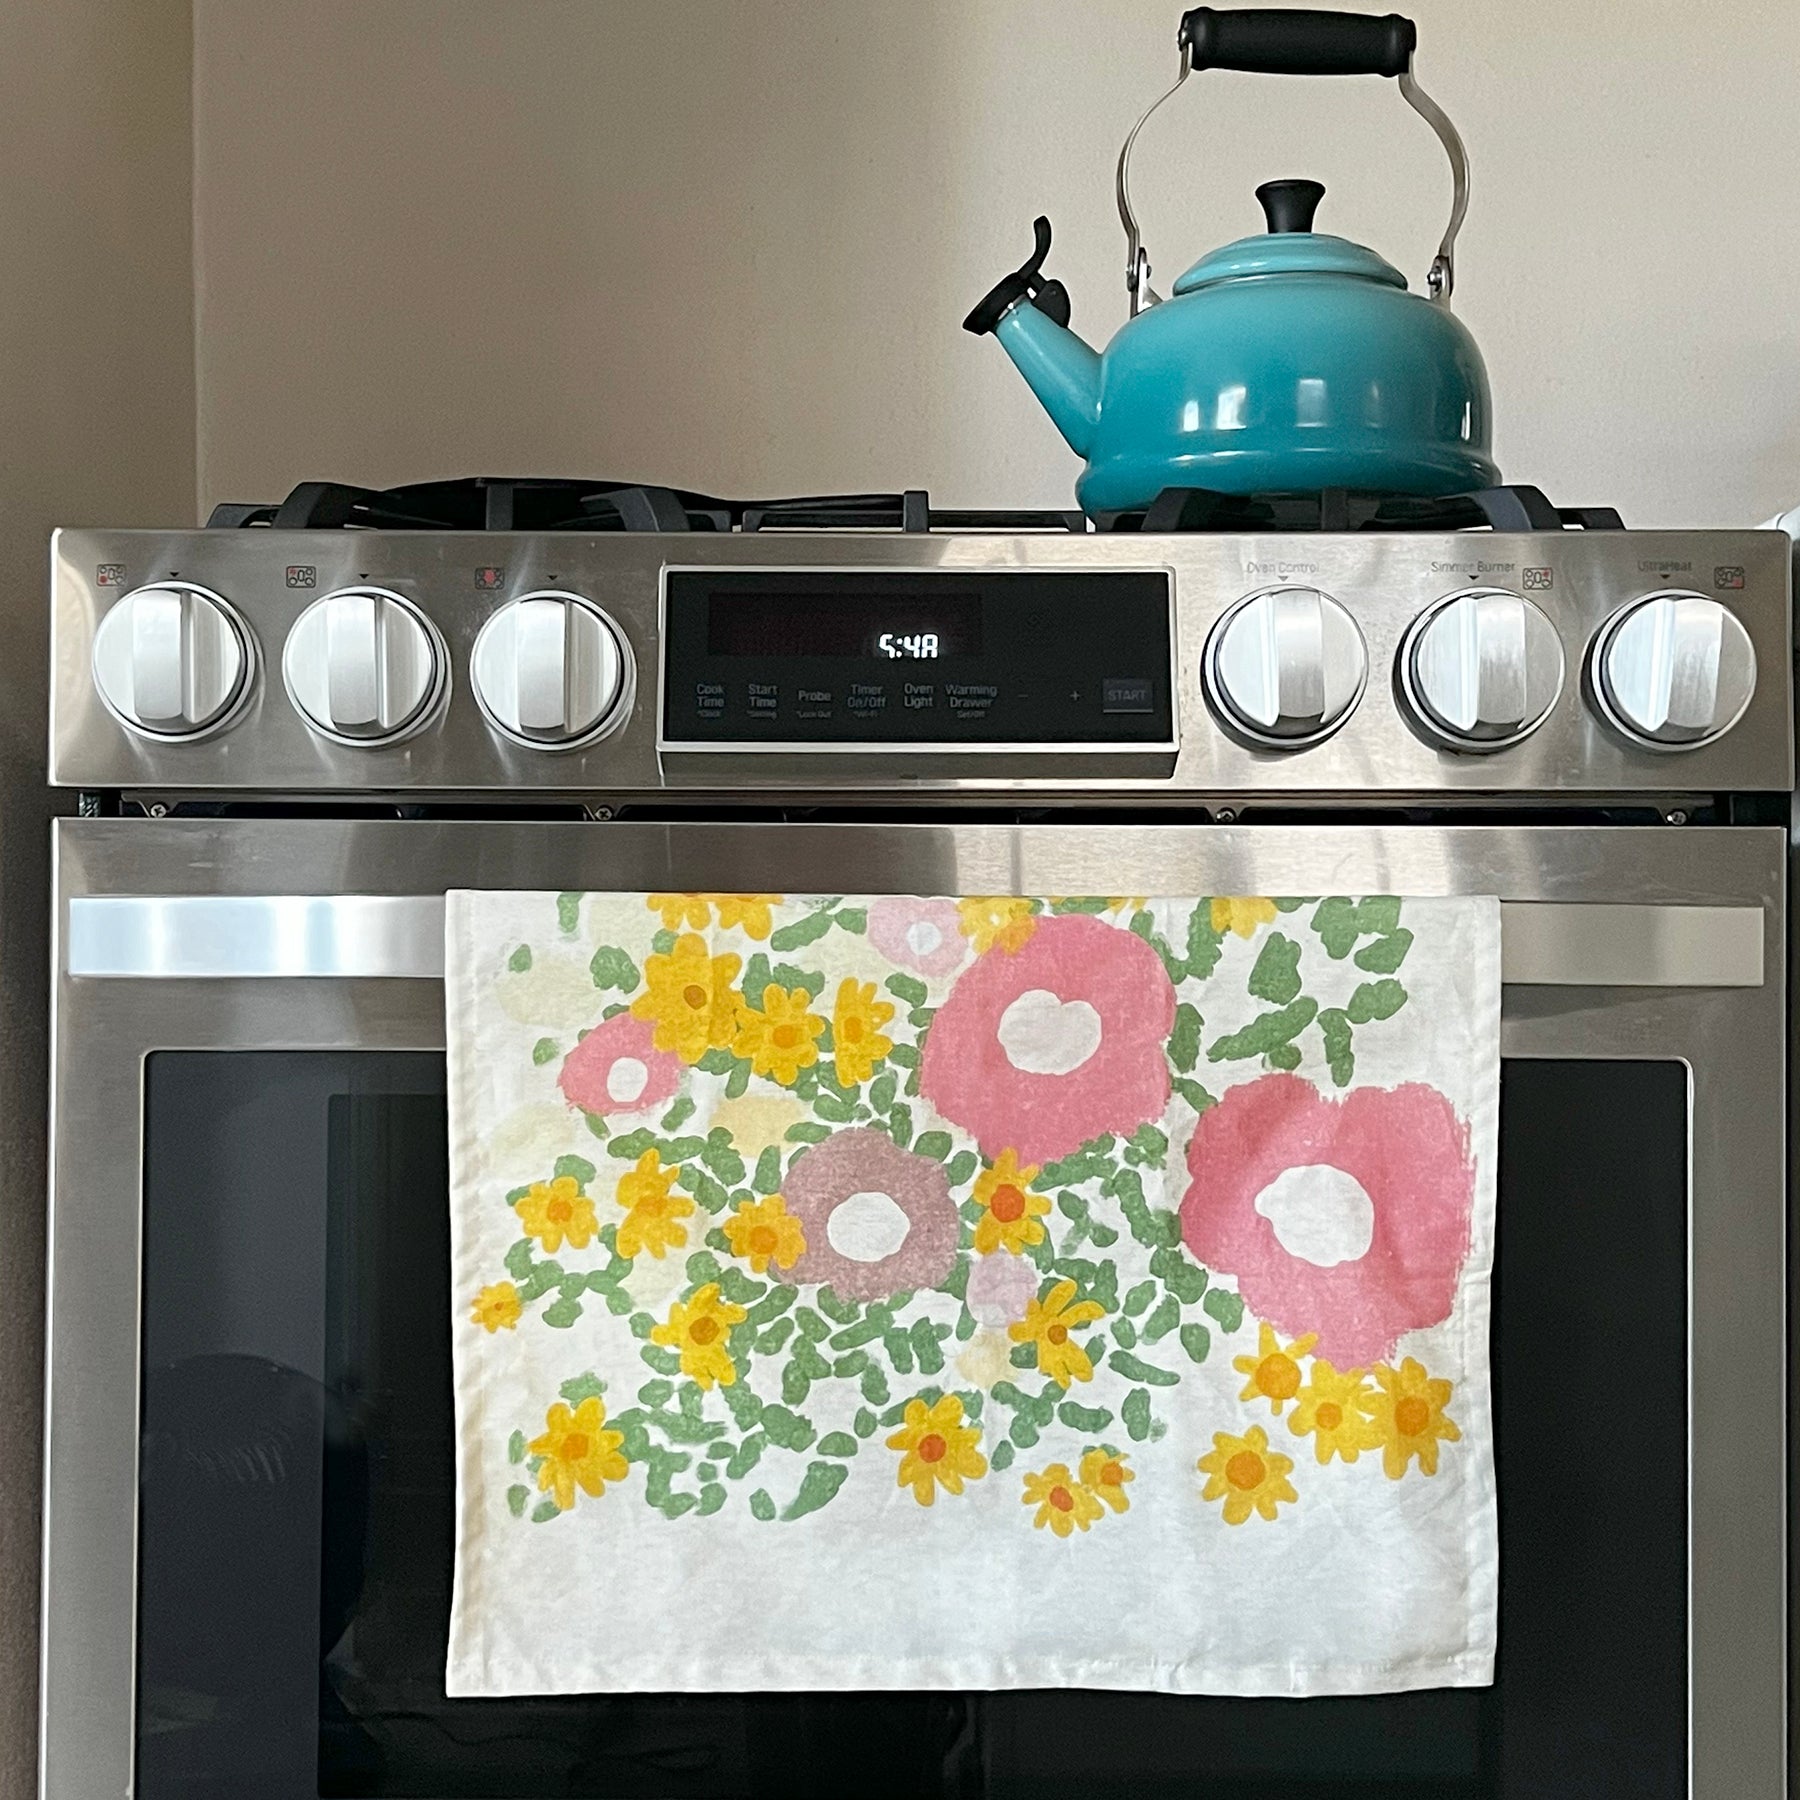 Tea Towels & Oven Gloves - Molly Singer Home